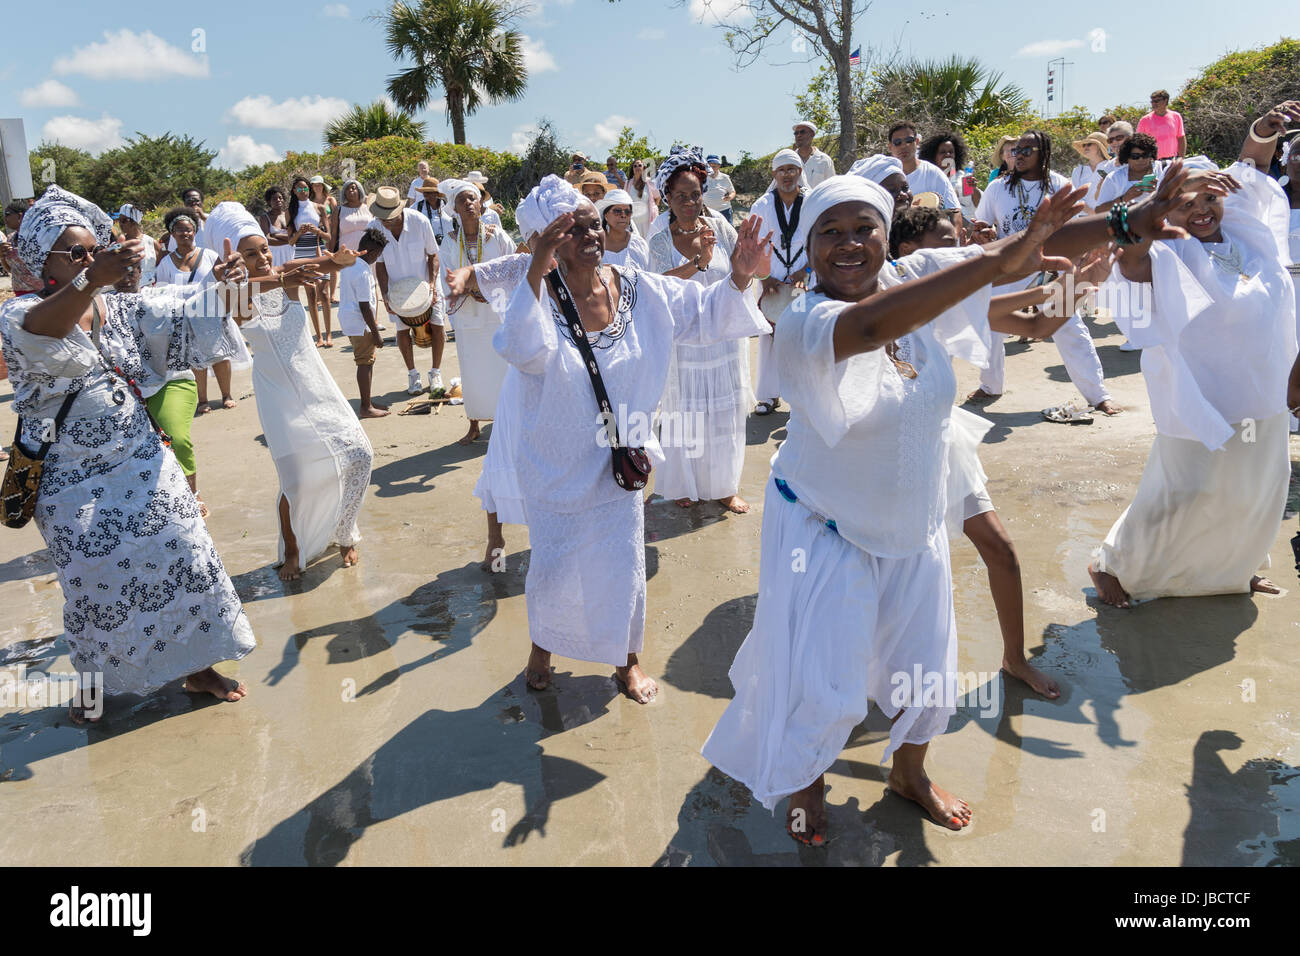 Descendants of enslaved Africans brought to Charleston in the Middle Passage dance to honor their relatives lost during a remembrance ceremony along the ocean front June 10, 2017 in Sullivan's Island, South Carolina. The Middle Passage refers to the triangular trade in which millions of Africans were shipped to the New World as part of the Atlantic slave trade. An estimated 15% of the Africans died at sea and considerably more in the process of capturing and transporting. The total number of African deaths directly attributable to the Middle Passage voyage is estimated at two million Africans. Stock Photo